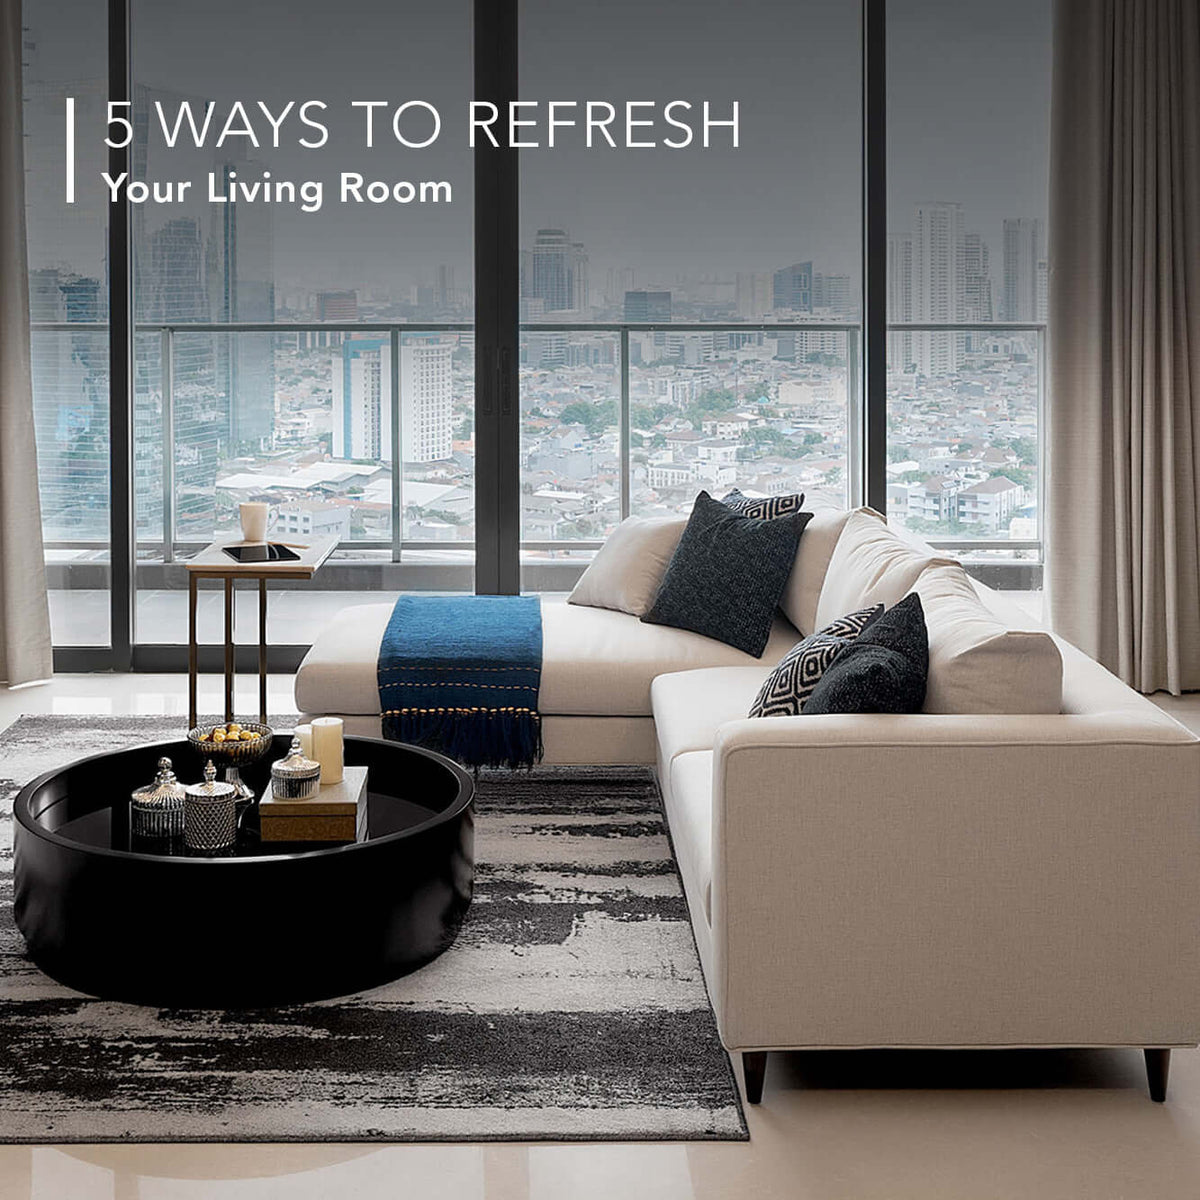 5 Ways to Refresh Your Living Room